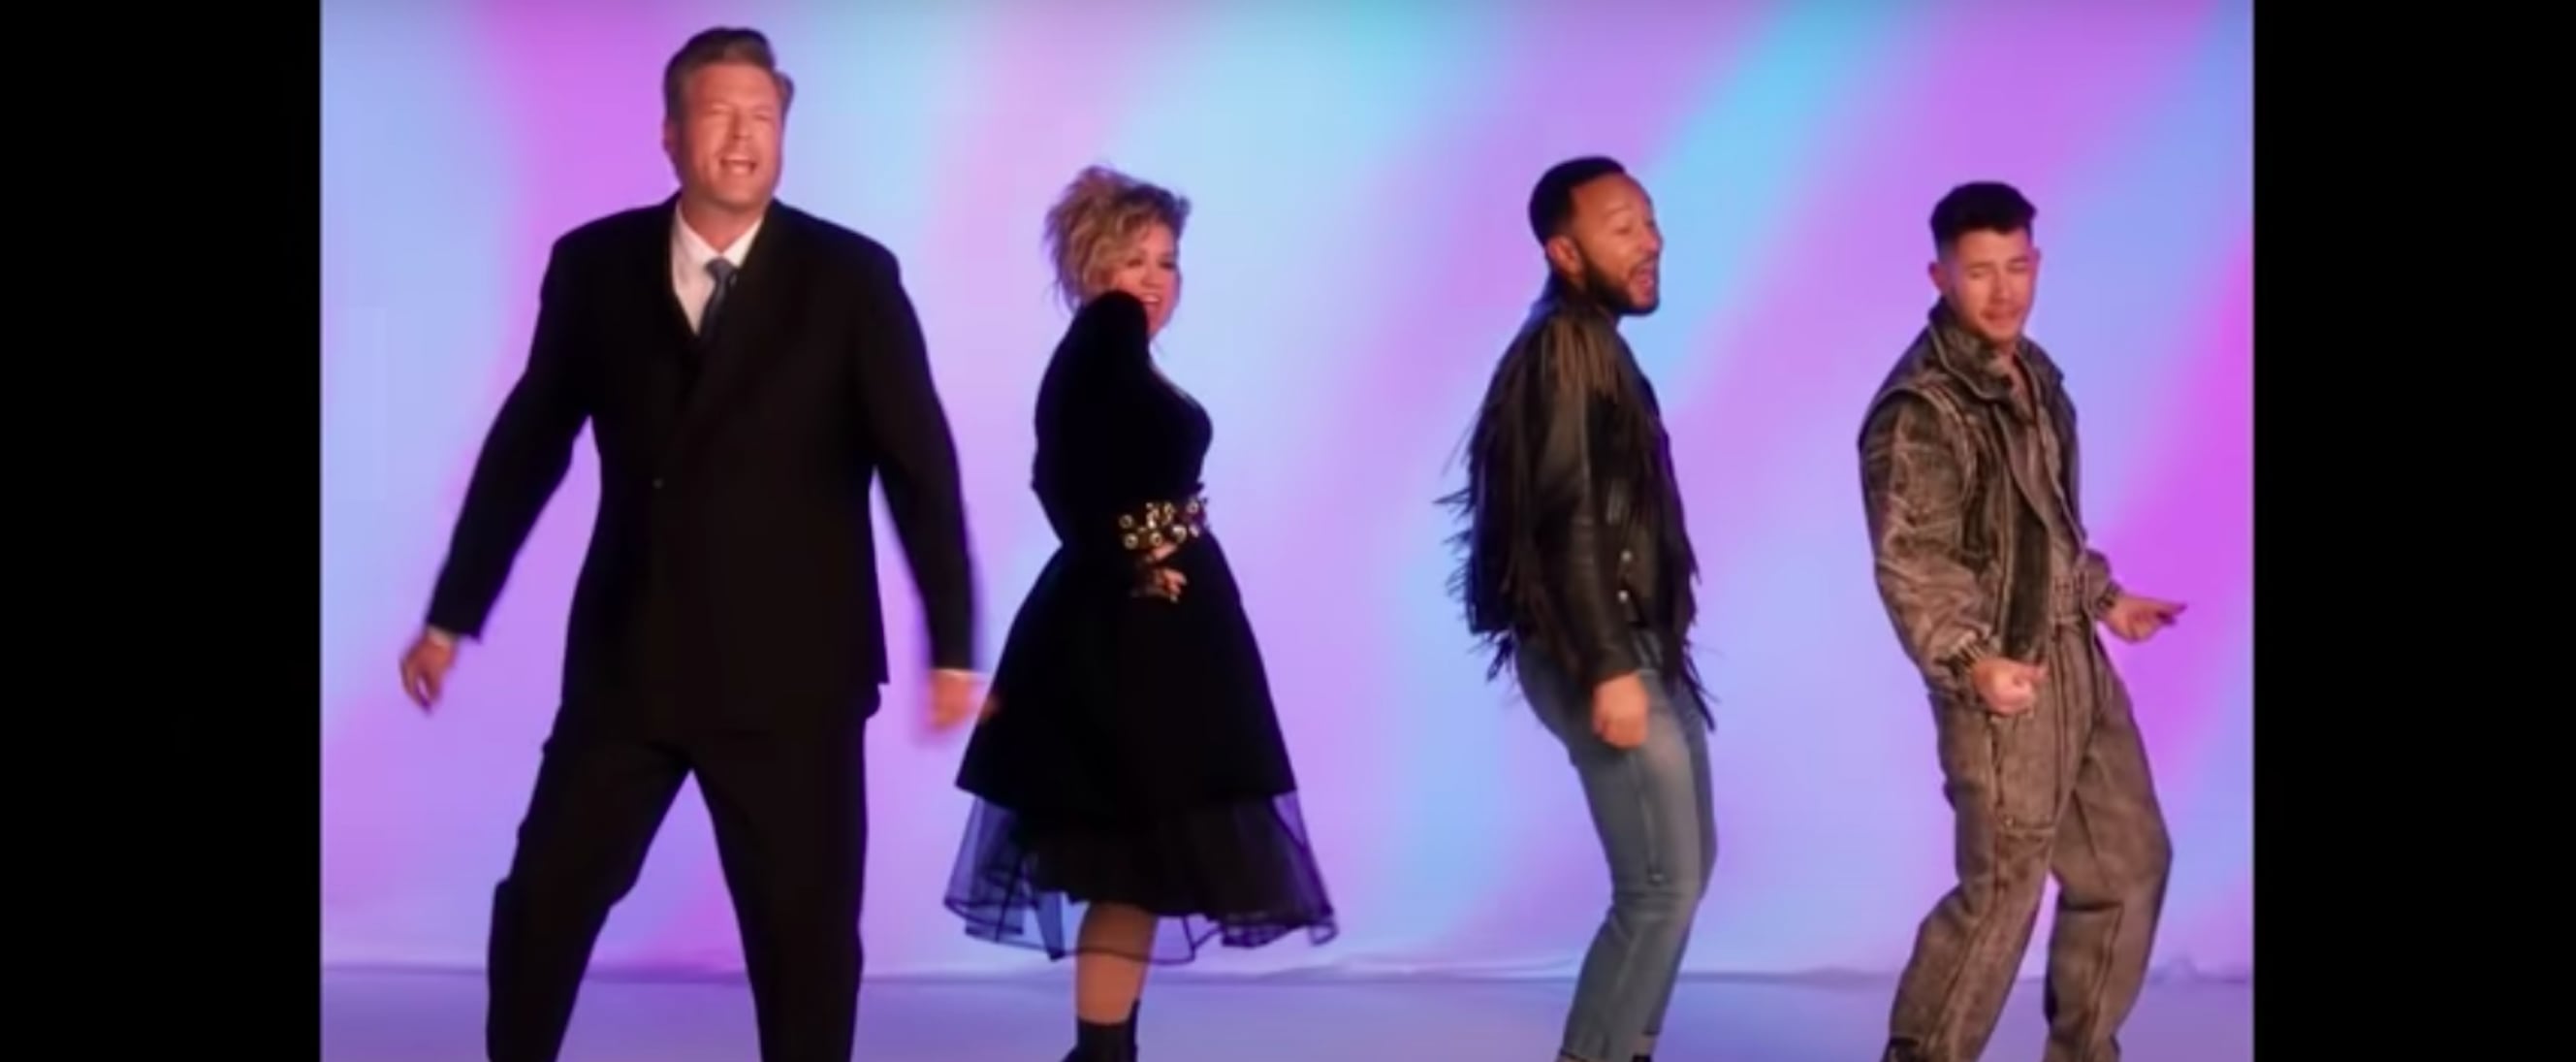 Watch The Voice Coaches' "Together Forever" Music Video POPSUGAR